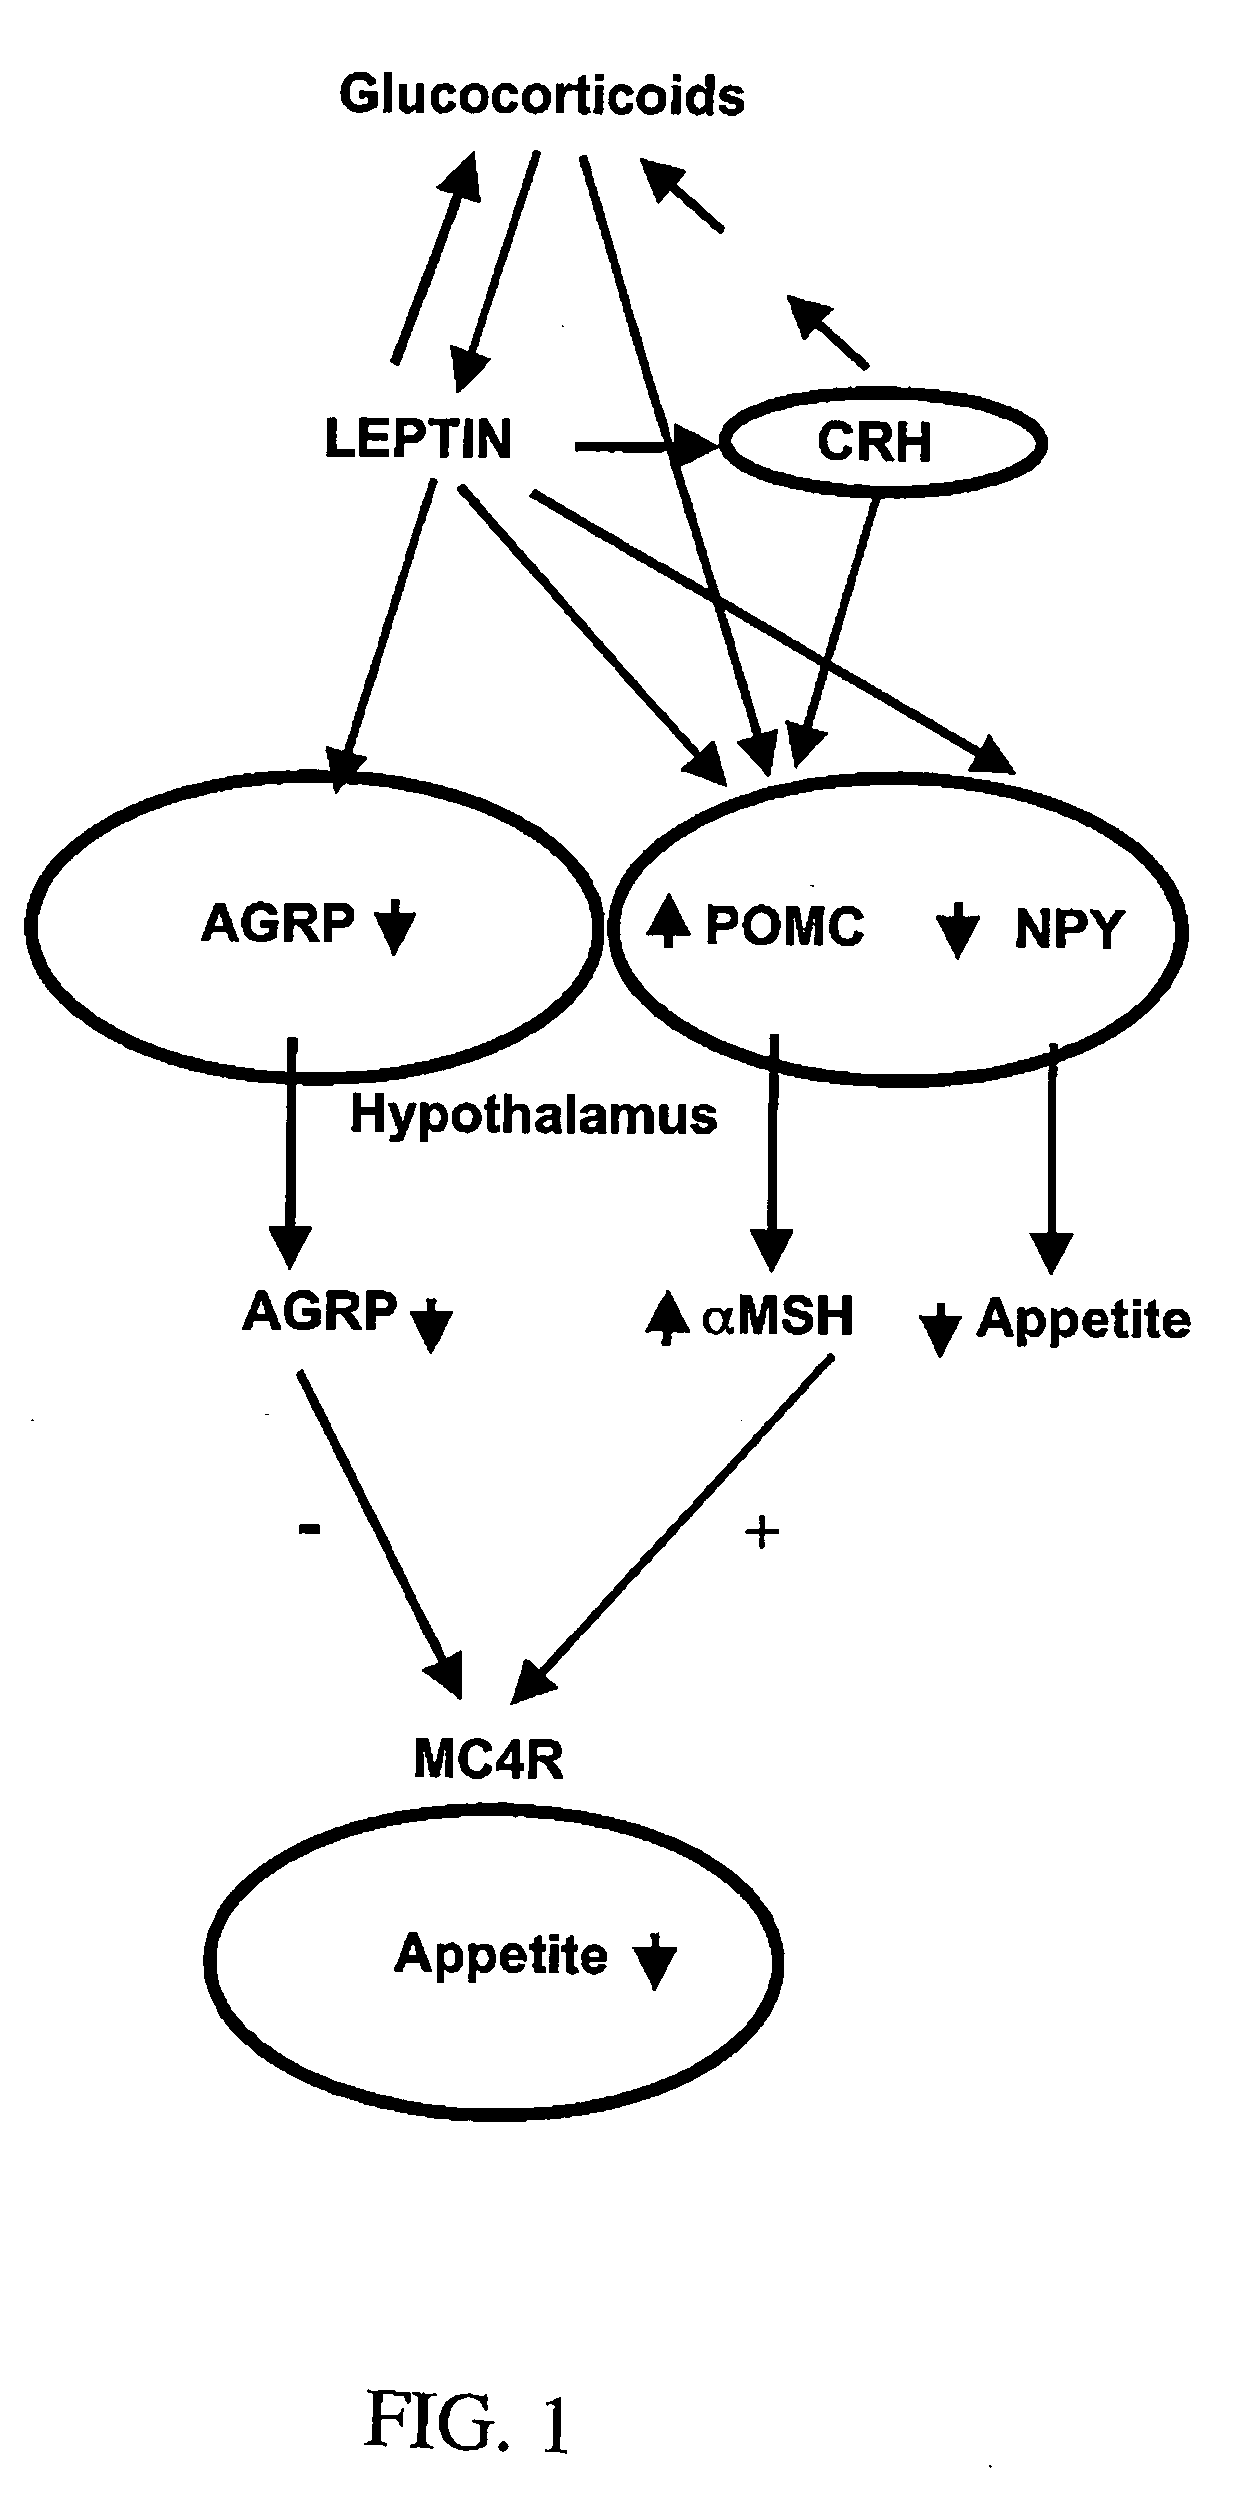 CRH and POMC effects on animal growth